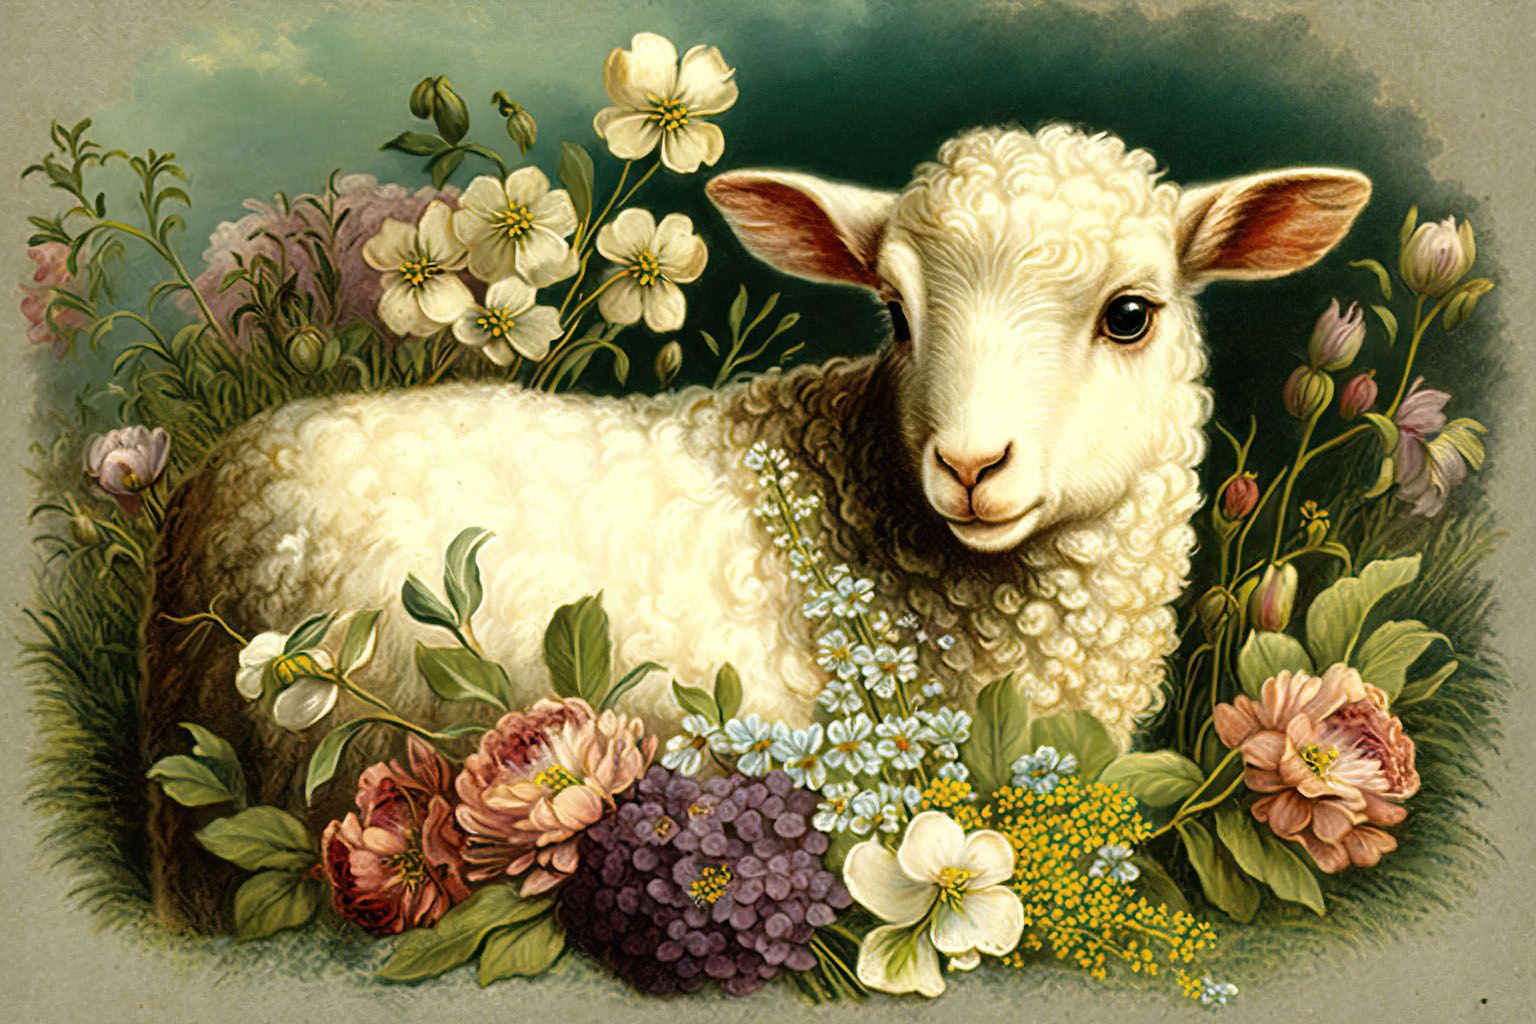 Small Sheep with flowers